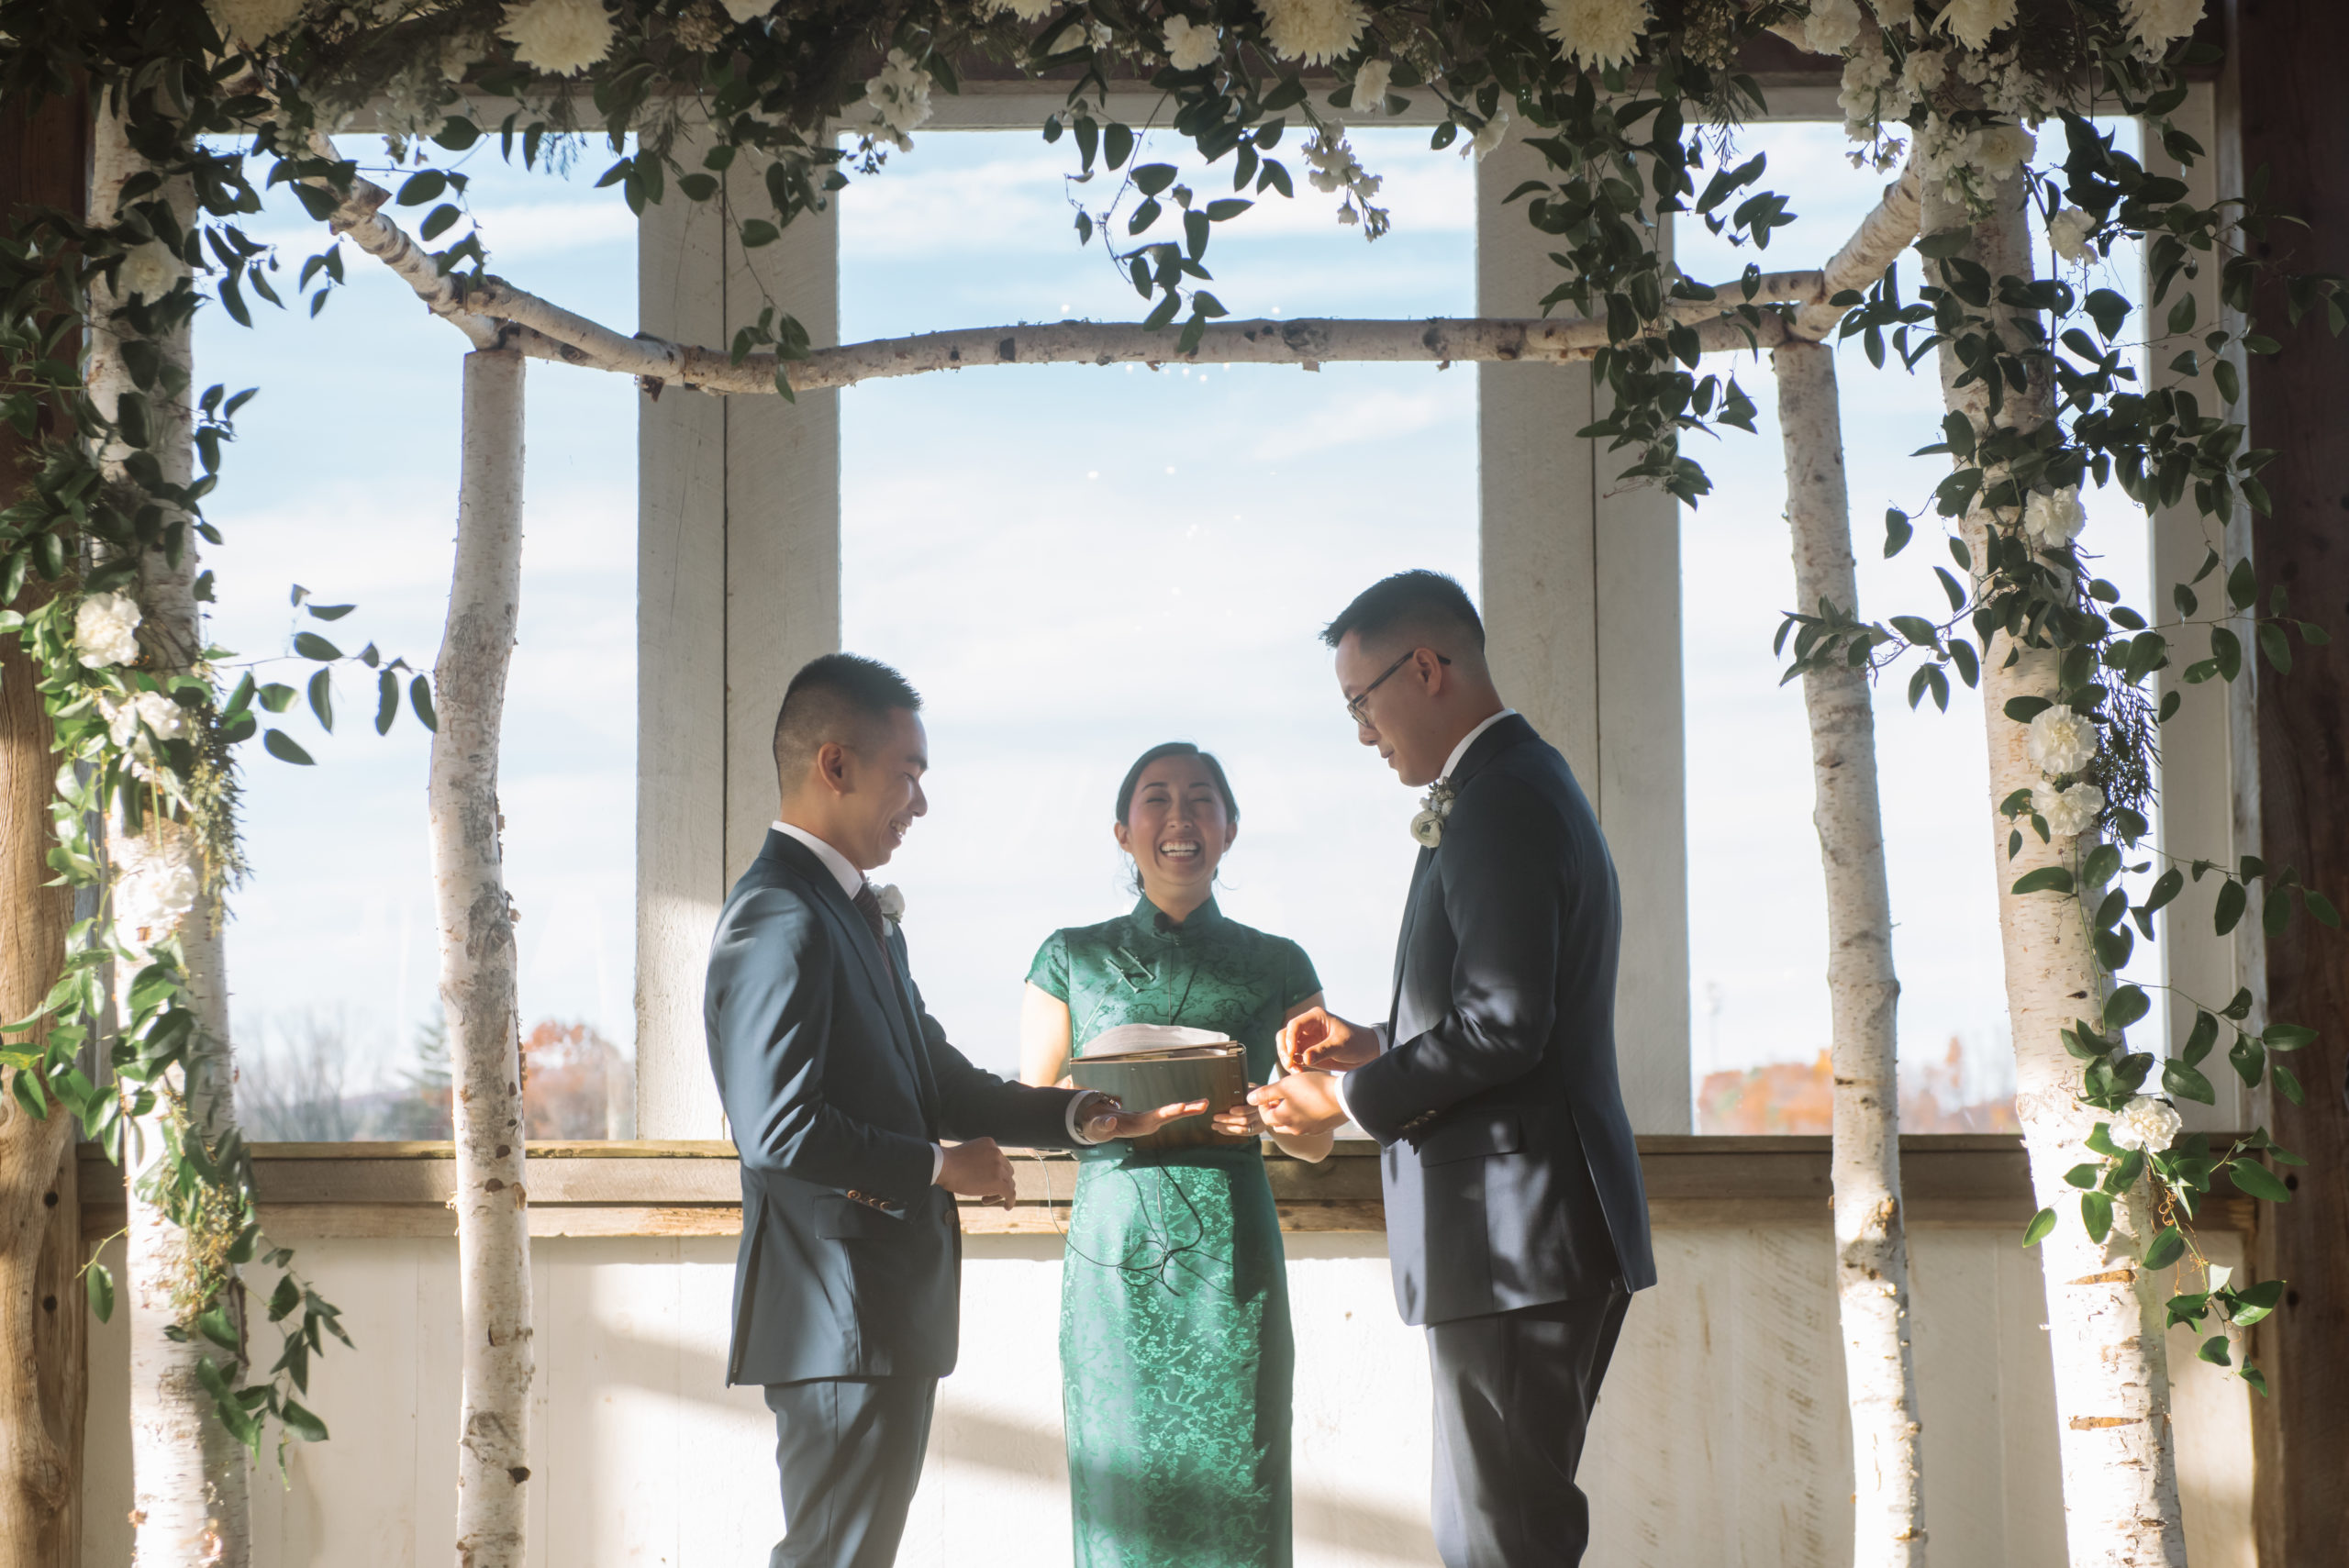 Two grooms mid-ceremony. One is about to place the wedding band on the other's hand. The officiant is smiling wide. She is dressed in a green qi pao and the grooms are dressed in two different shades of dark blue suits. The alter is decorated with birch trees, greenery, and white florals.